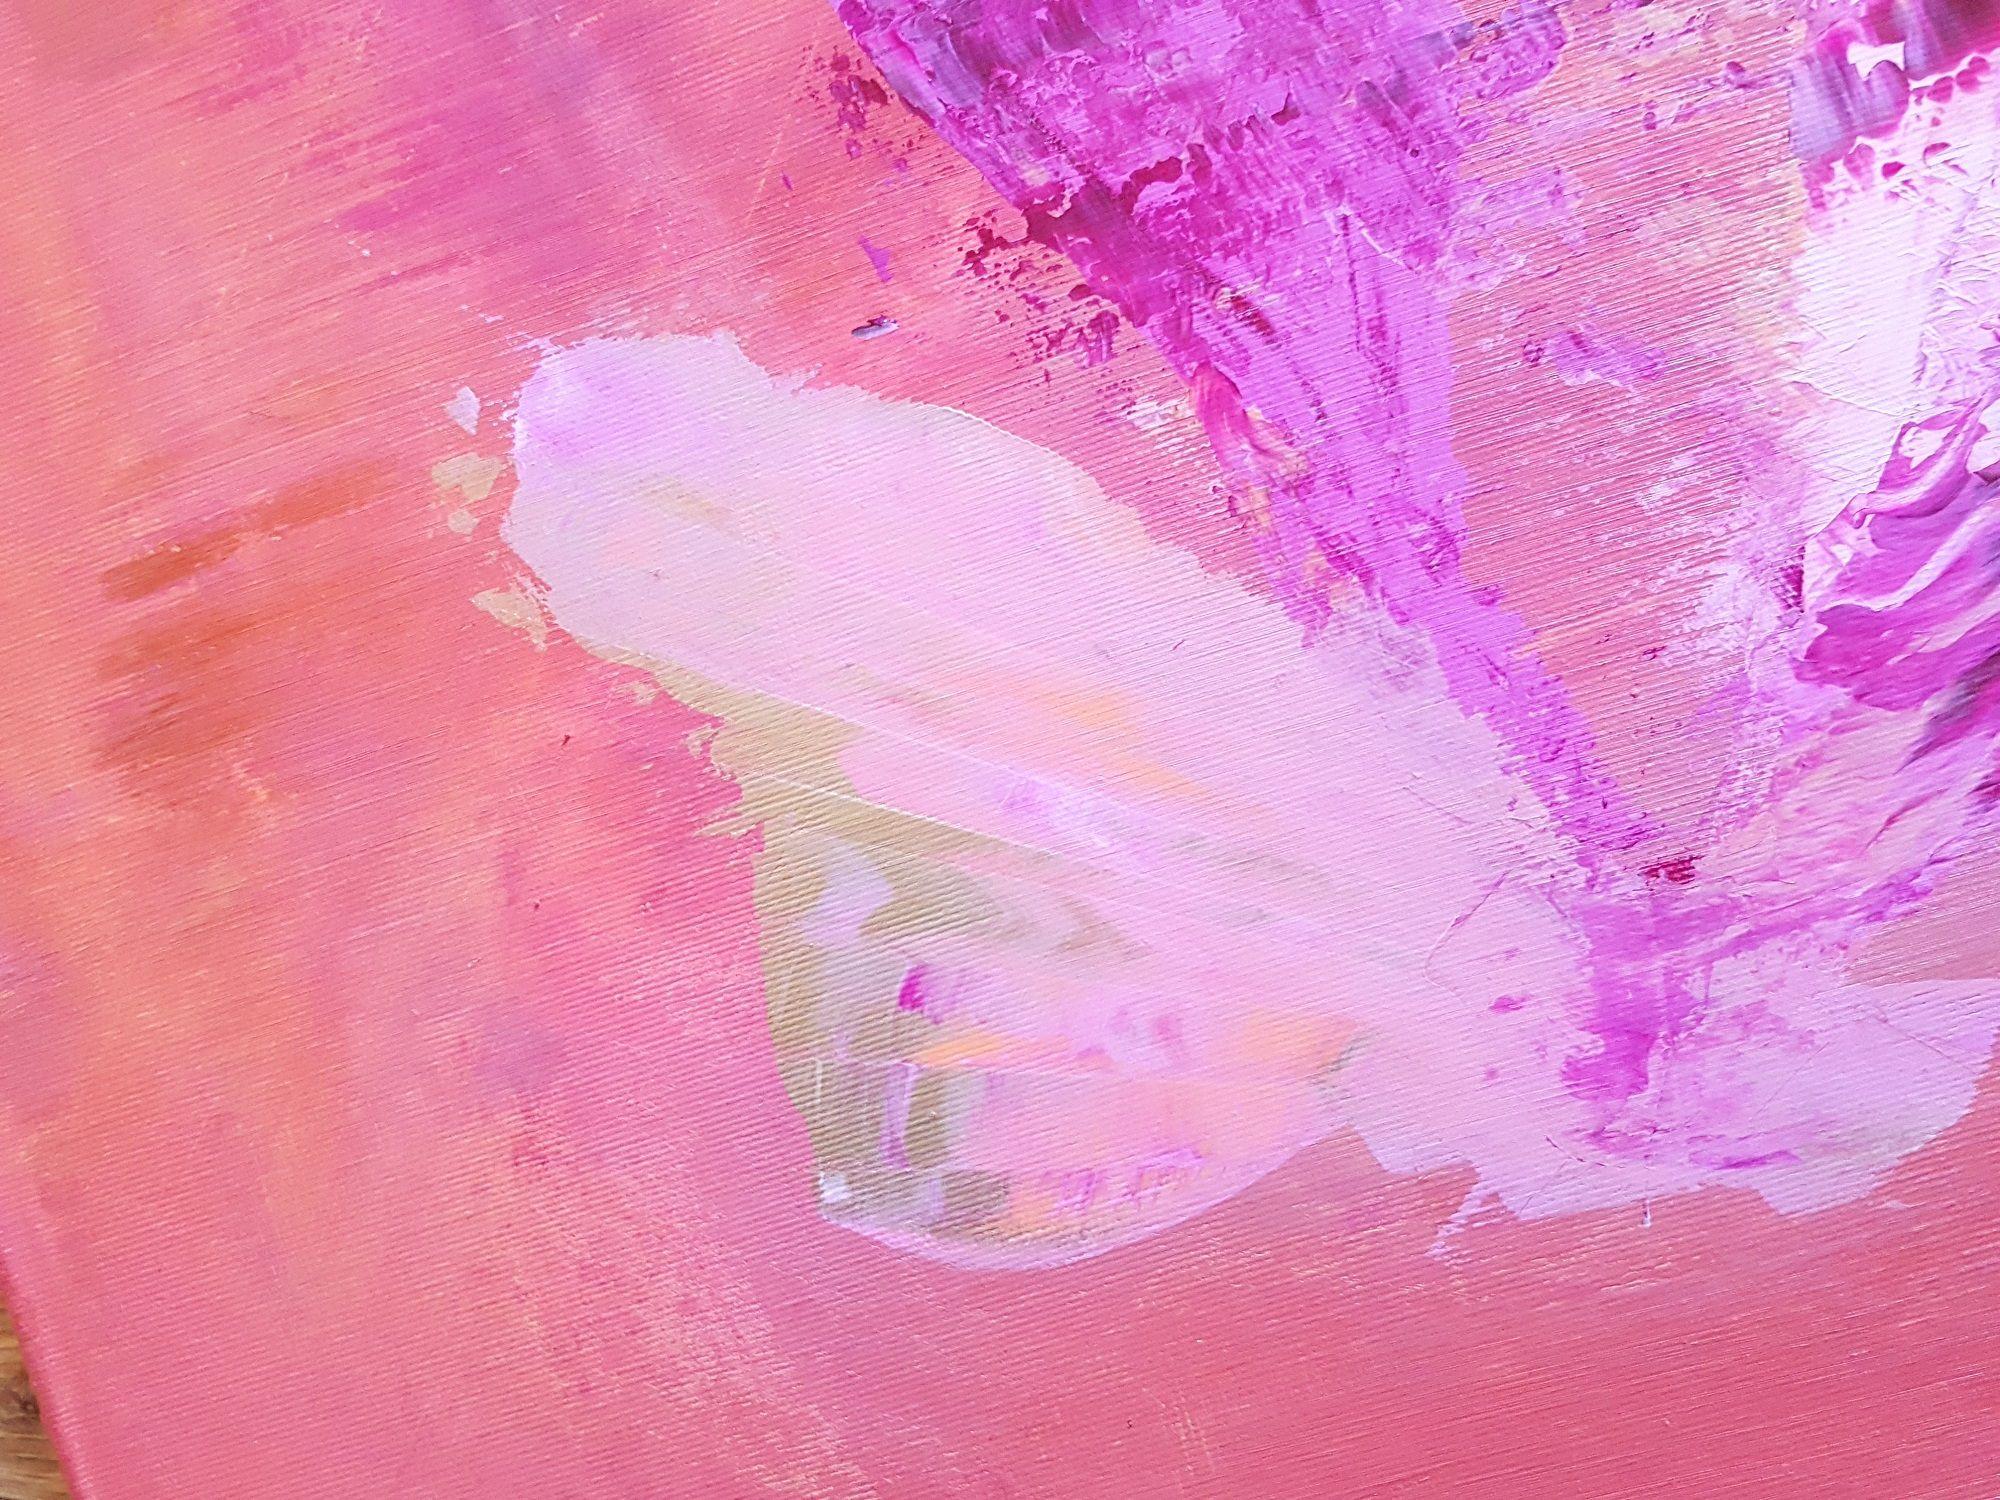 An original one of kind abstract painting with a gentle texture.    Shades of pink and purple with a touch of silver and gold.  The painting gives a sense of freshness and freedom and it will certainly brighten up even the darkest room.   